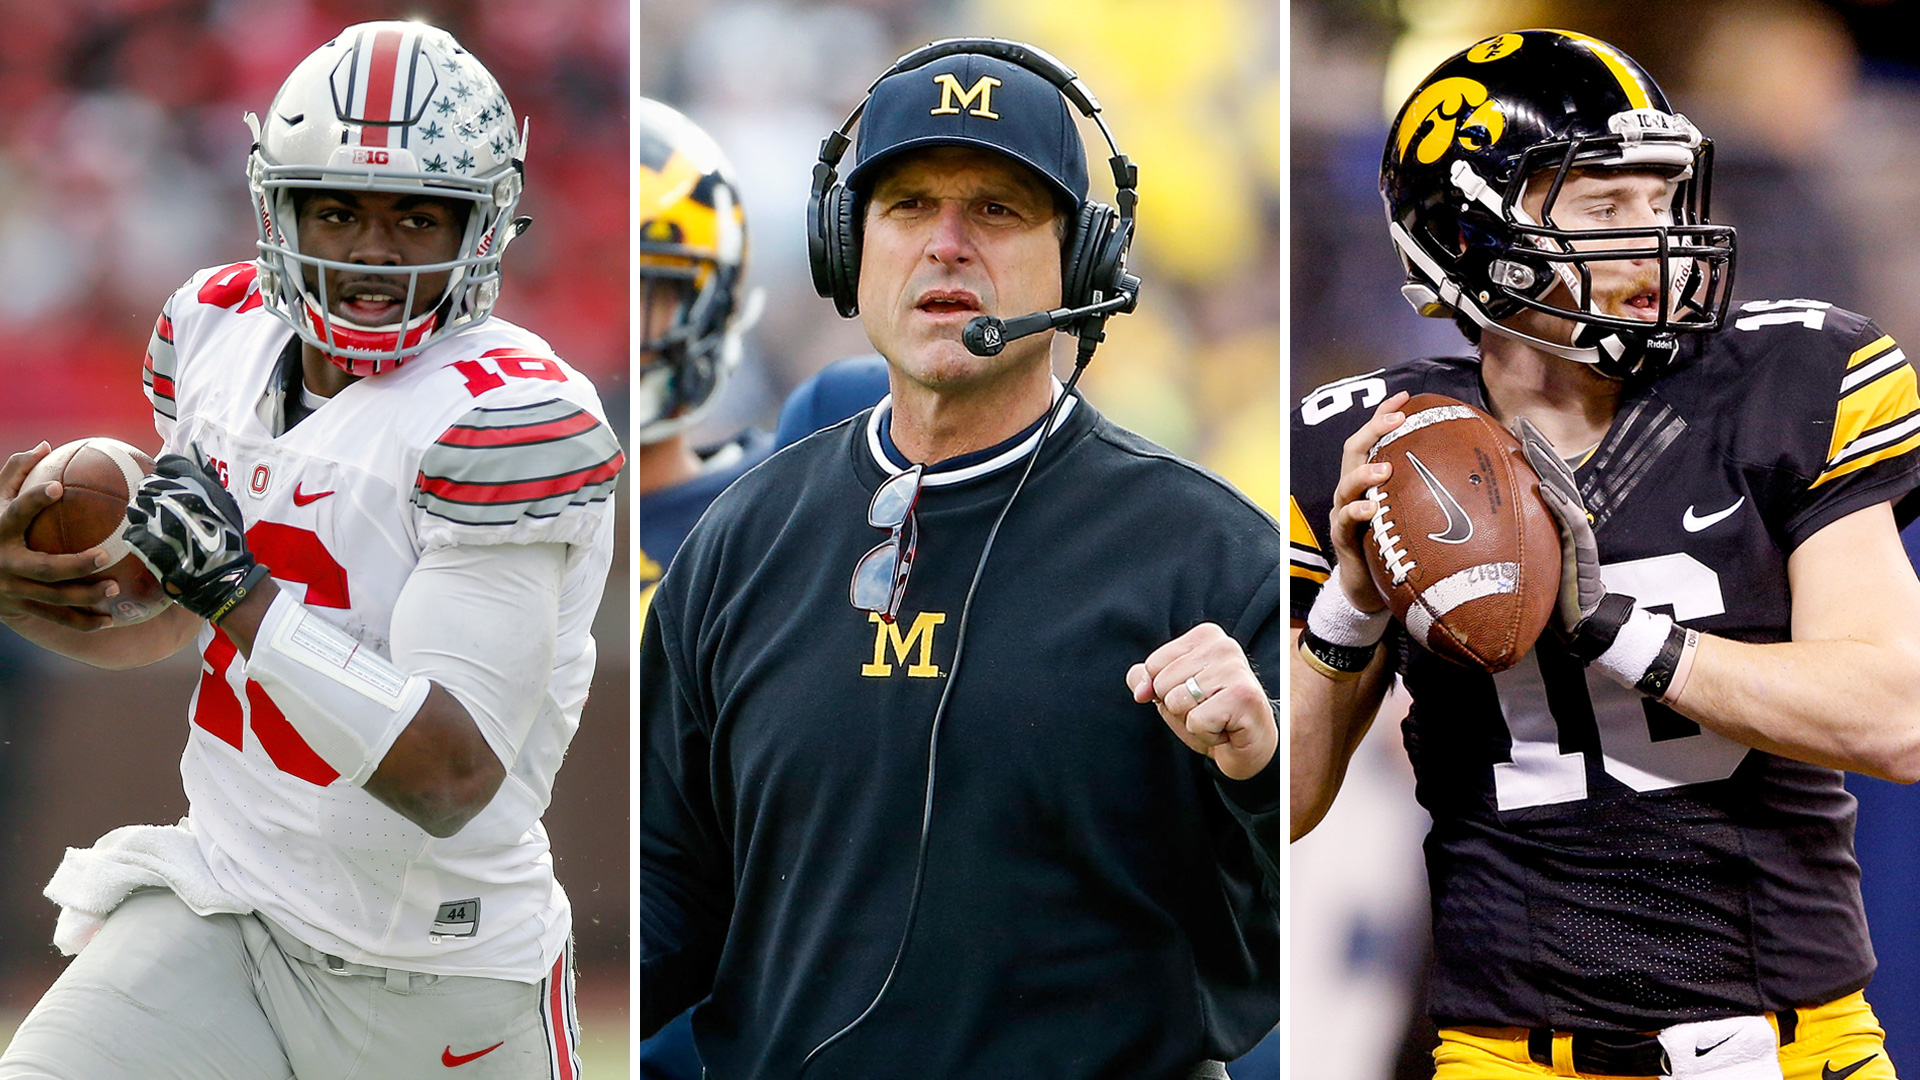 Big Ten Predictions: Breakouts, upsets and a battle for survival | Sporting News